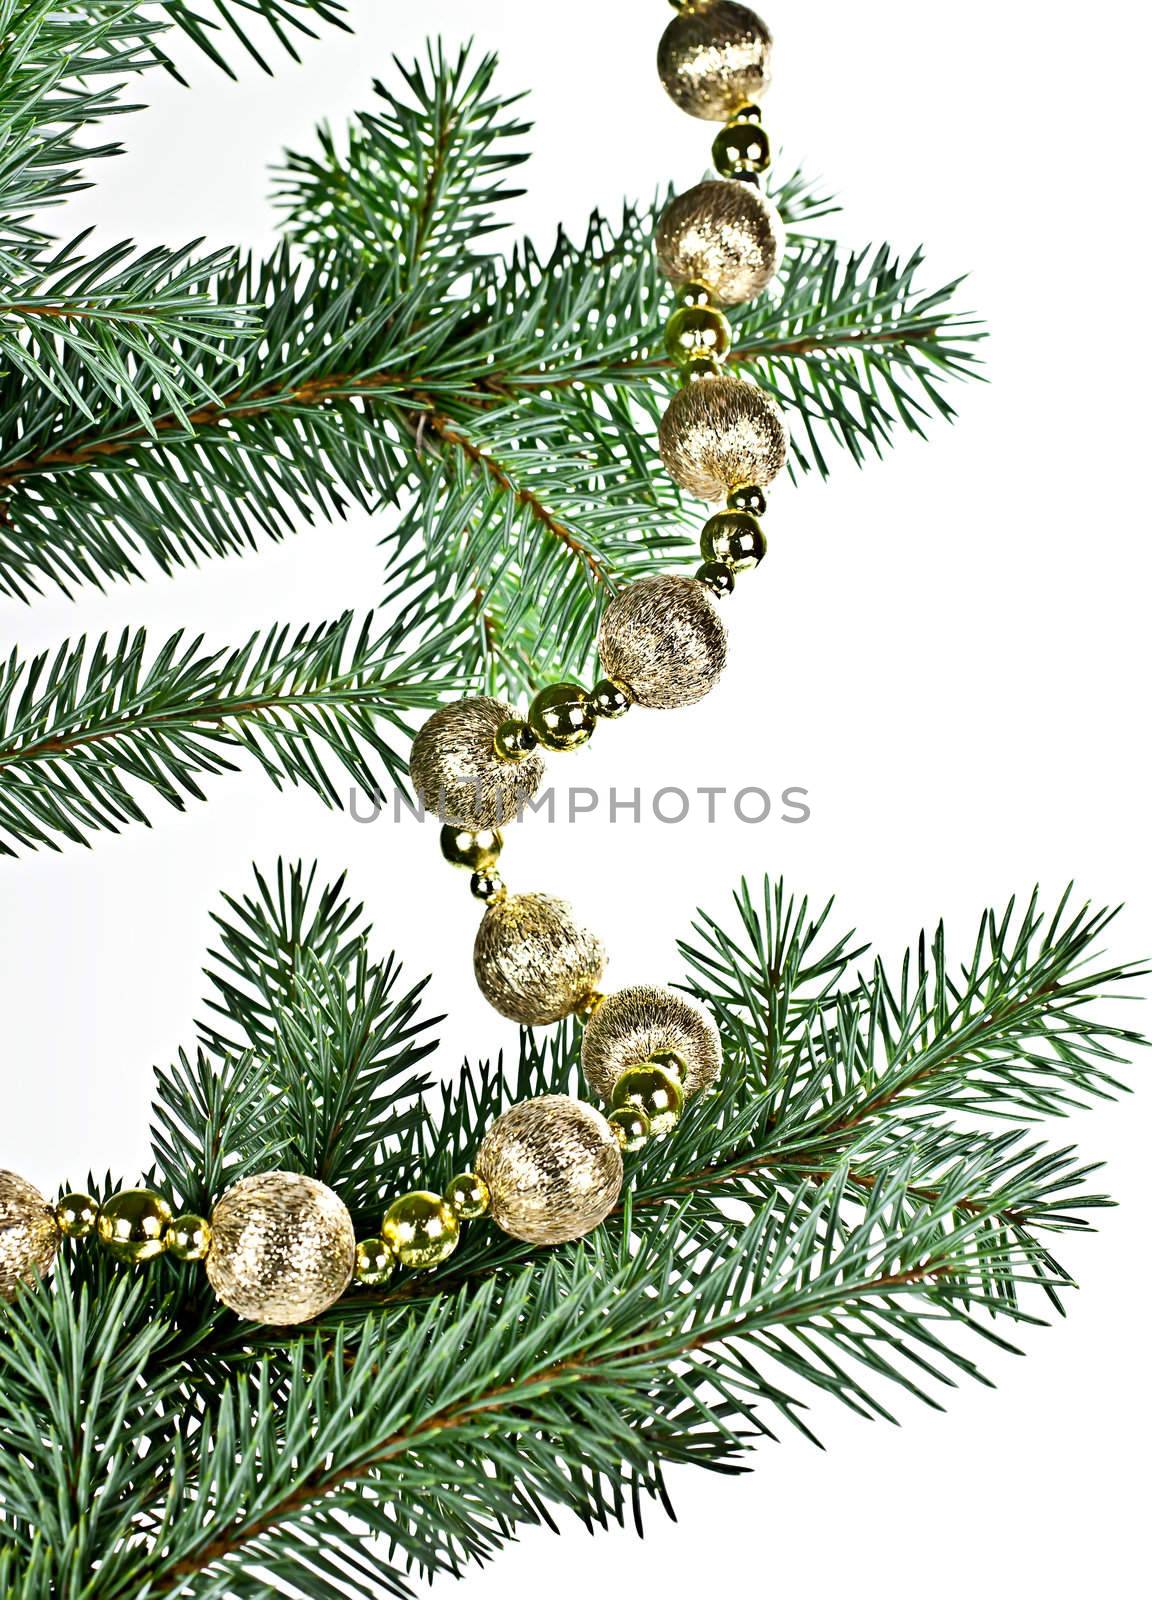 Isolated on a white background with a spruce twig Christmas decorations in a string of bombs.